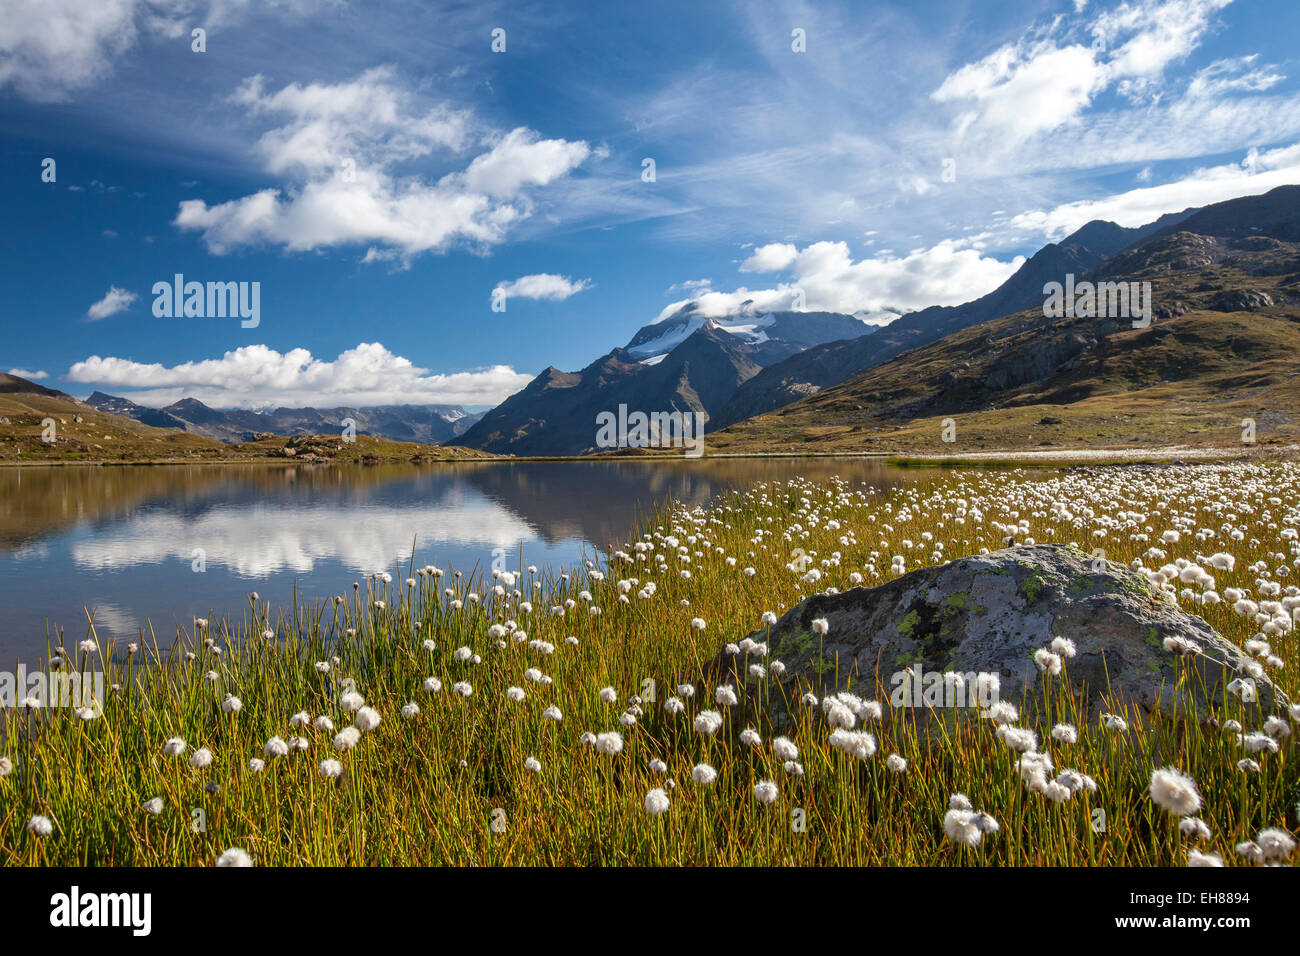 The banks of a lake in Upper Valtellina, by the Gavia Pass, covered in cottongrass (eriophorus), Valtellina, Lombardy, Italy Stock Photo